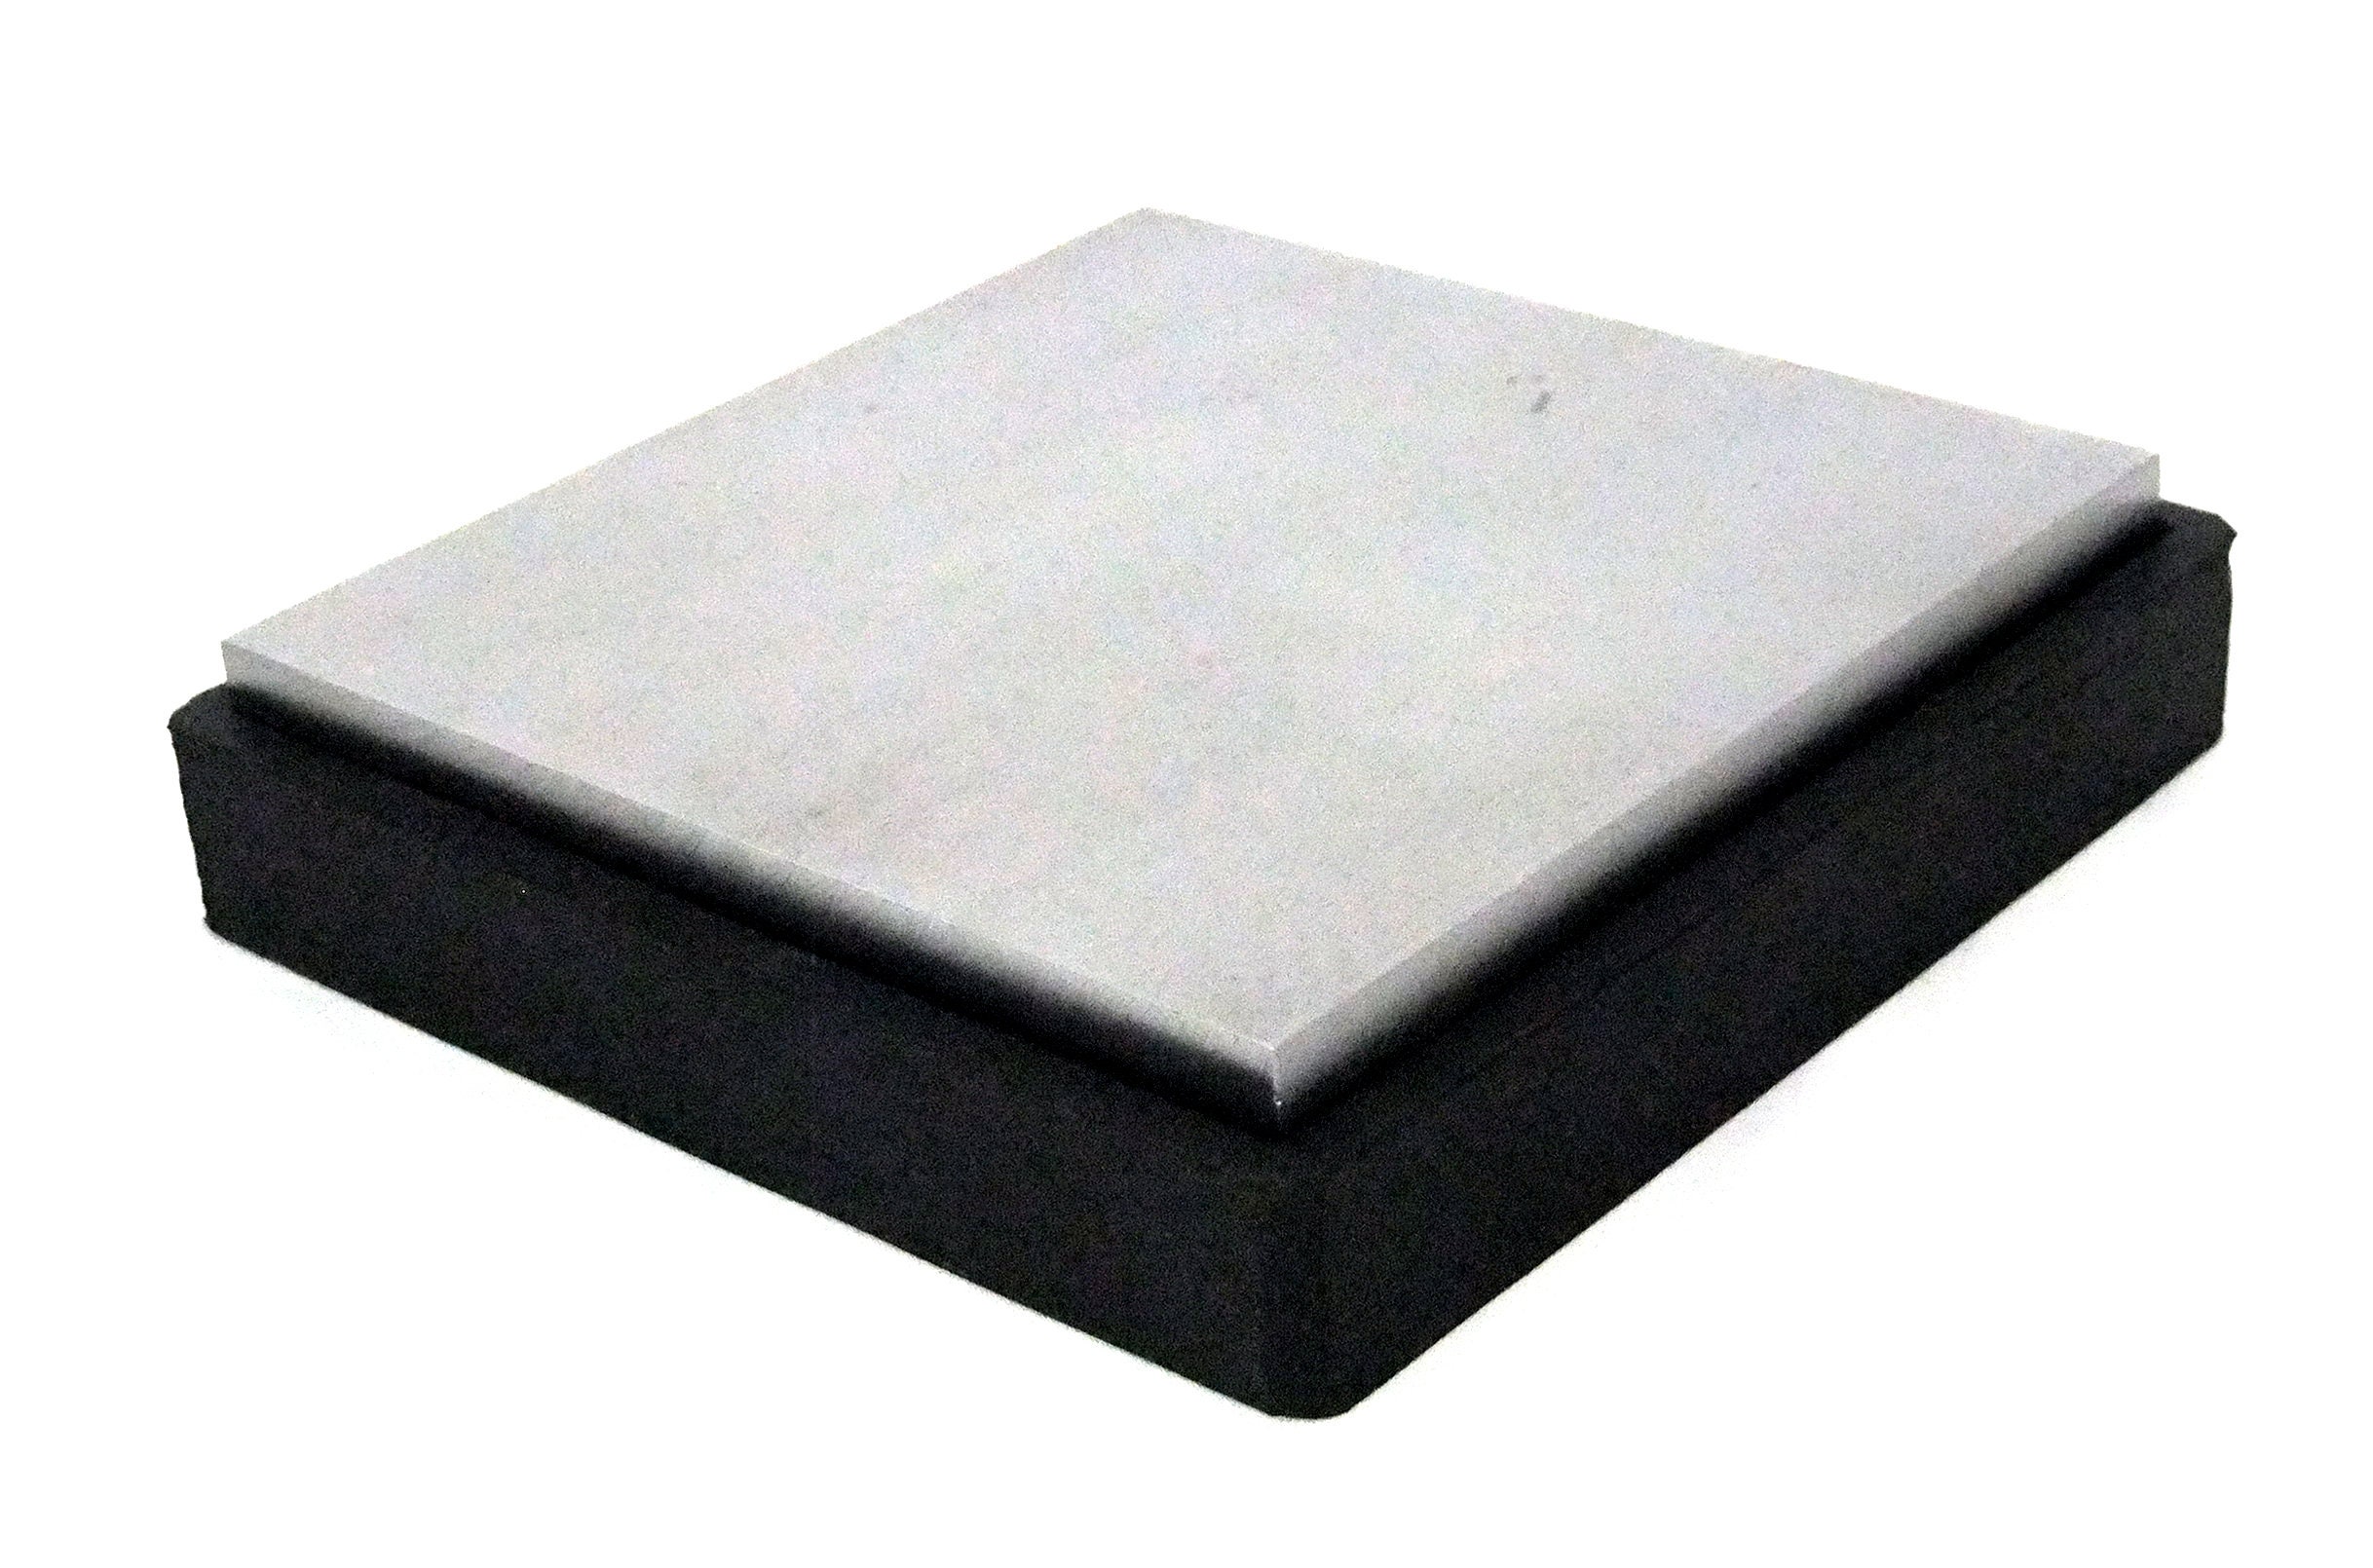 Steel BENCH BLOCK, Extra Large 6 x 6 Square Steel Block with Rubber Base,  Metal Forming Jewelry Making Tool - LakiKaiSupply